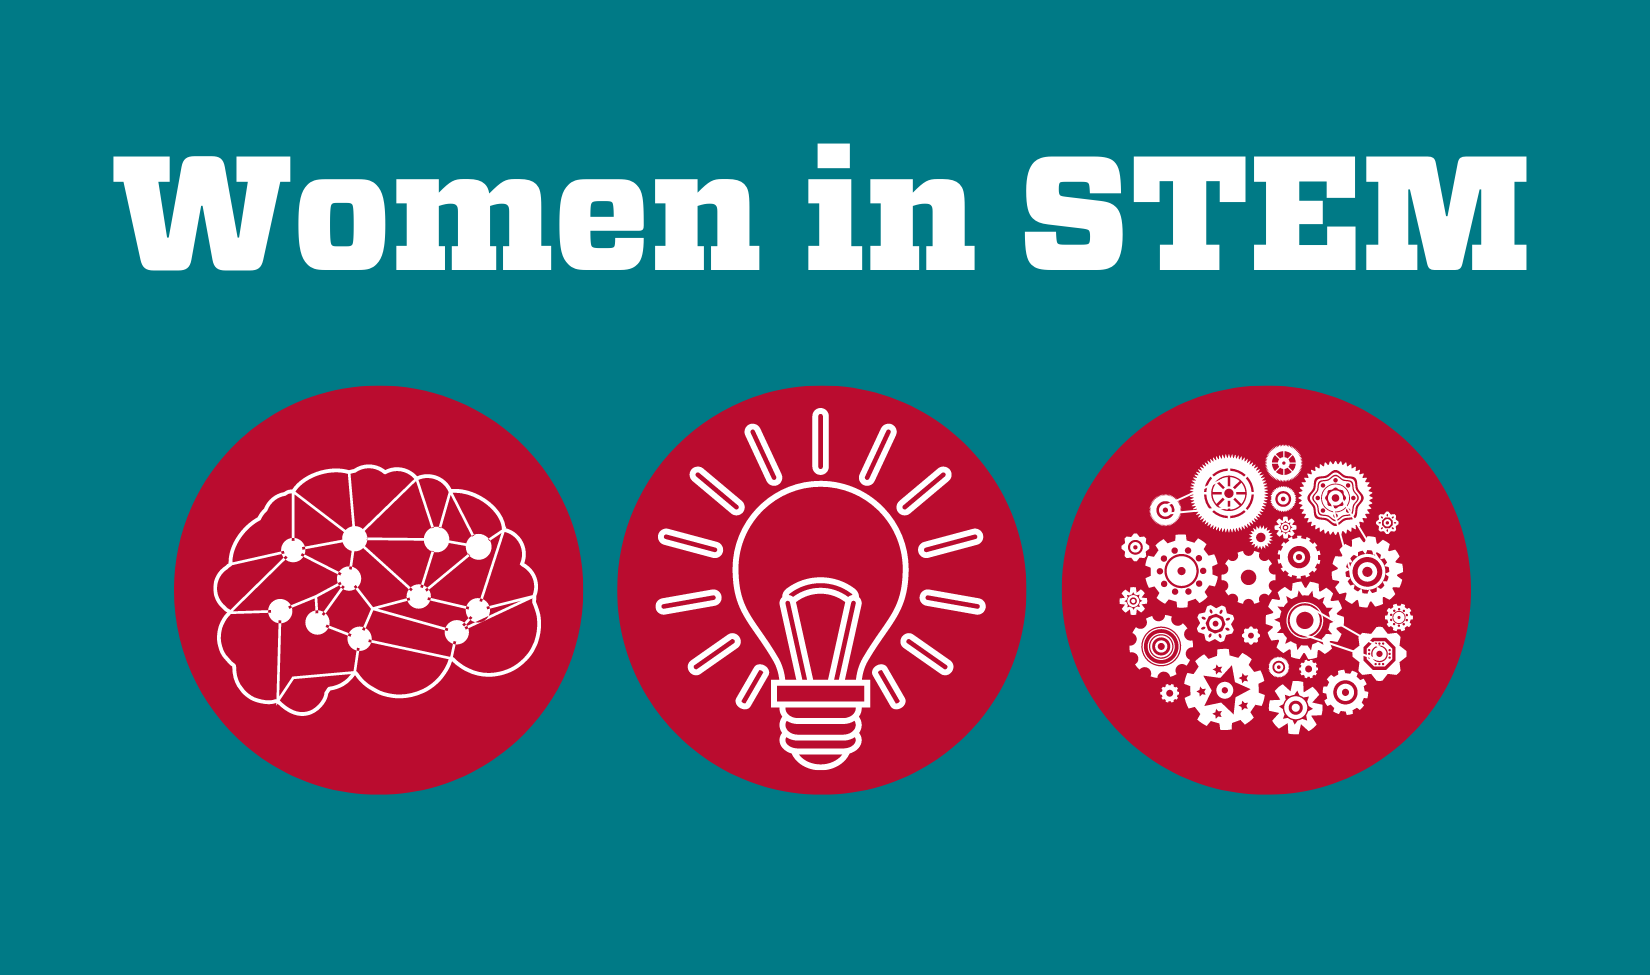 Two UNM Political Science Professors Named as 2022 Women in STEM Award Recipients.